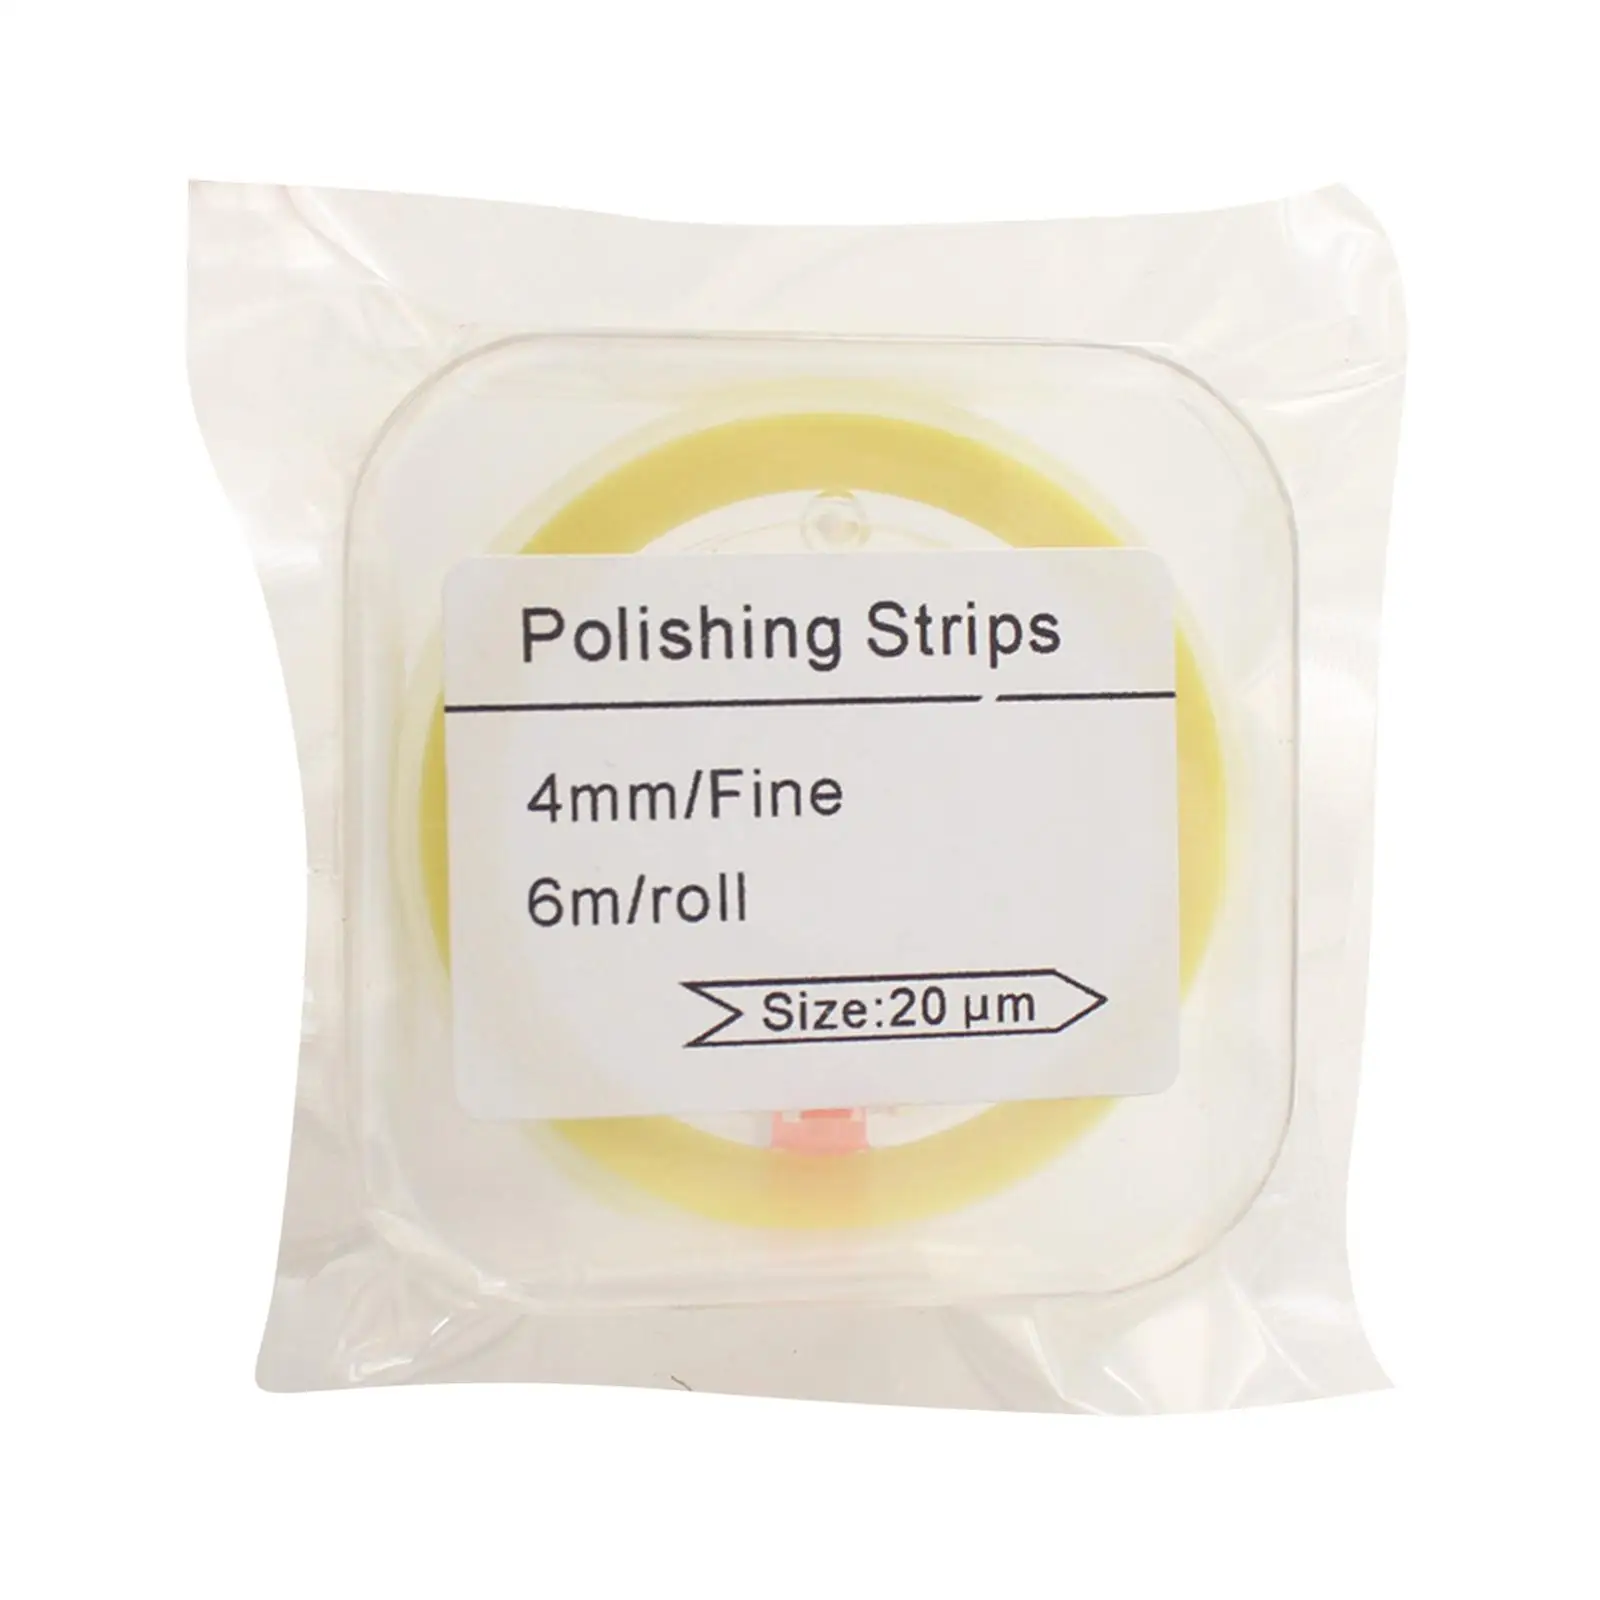 6 M/Roll Polishing Strips Small in Size Durable Teeth Strip Good Grinding Strip